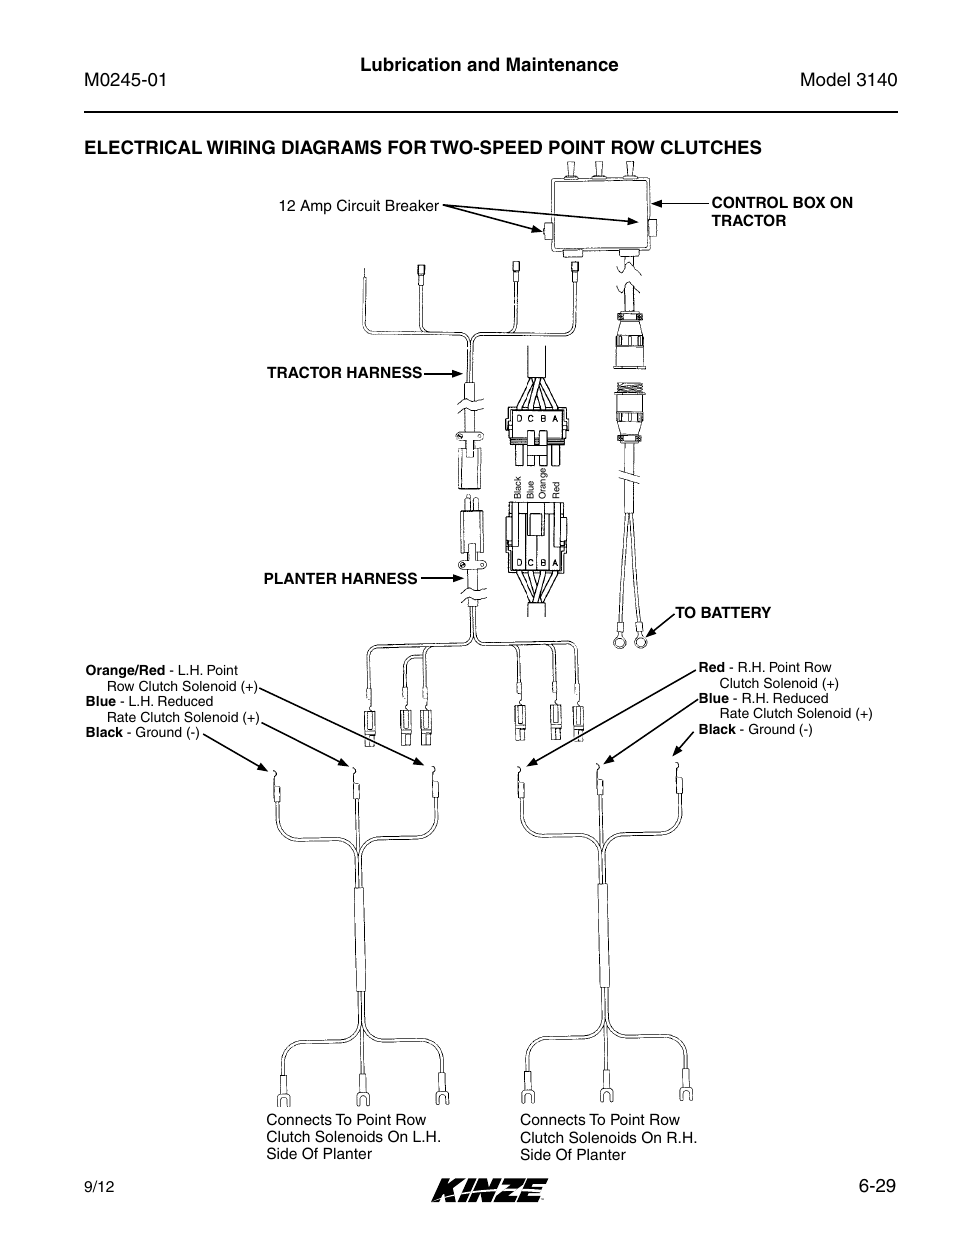 29 lubrication and maintenance | Kinze 3140 Stack Fold Planter Rev. 7/14 User Manual | Page 135 / 150